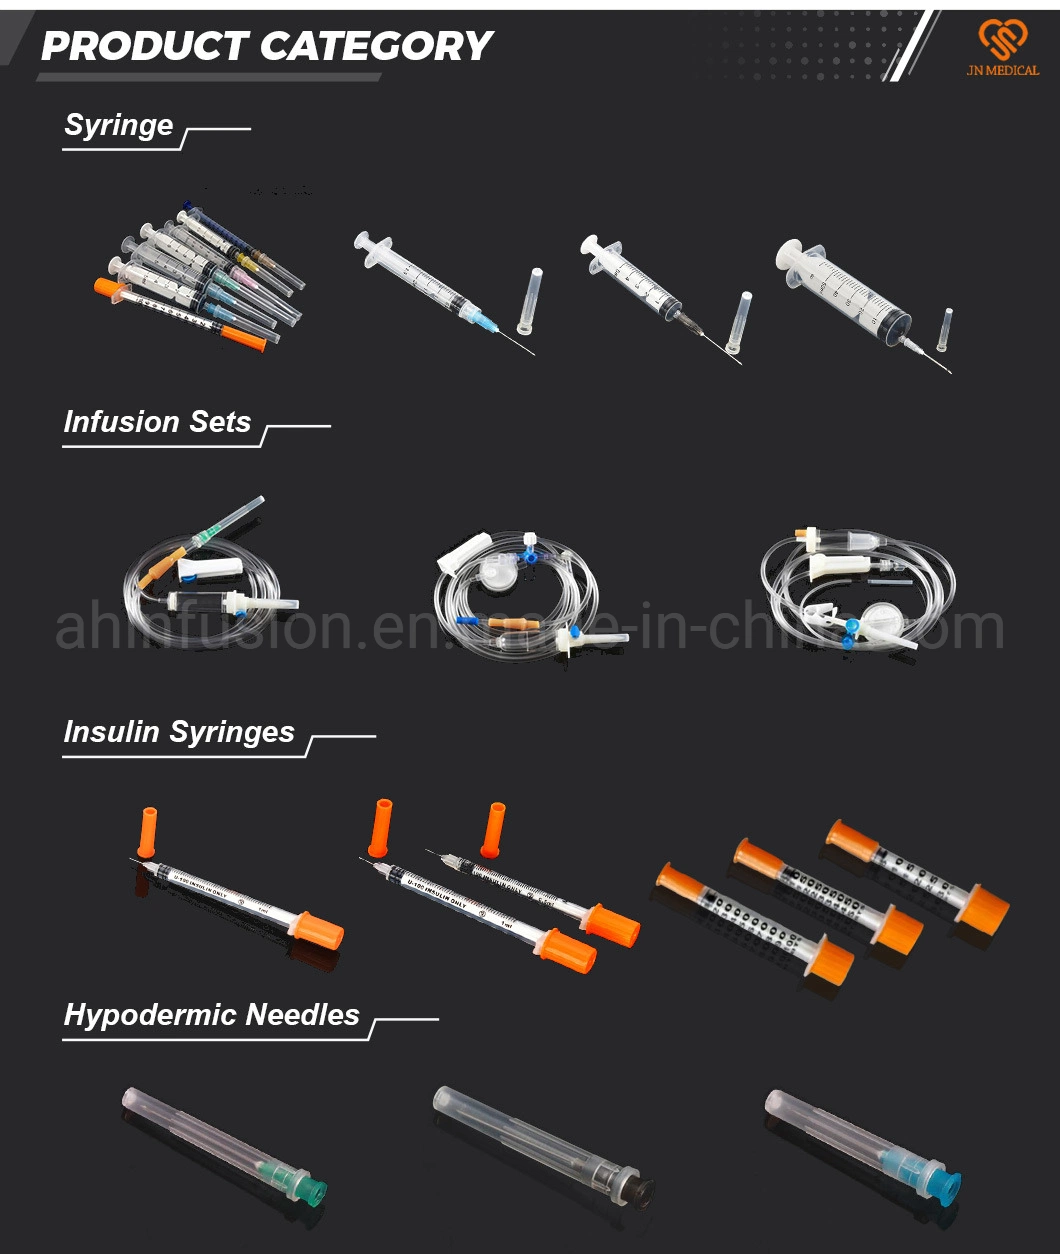 Medical Supply of Disposable Plastic Vaccine Syringes with Needles Luer Slip 1cc 1ml